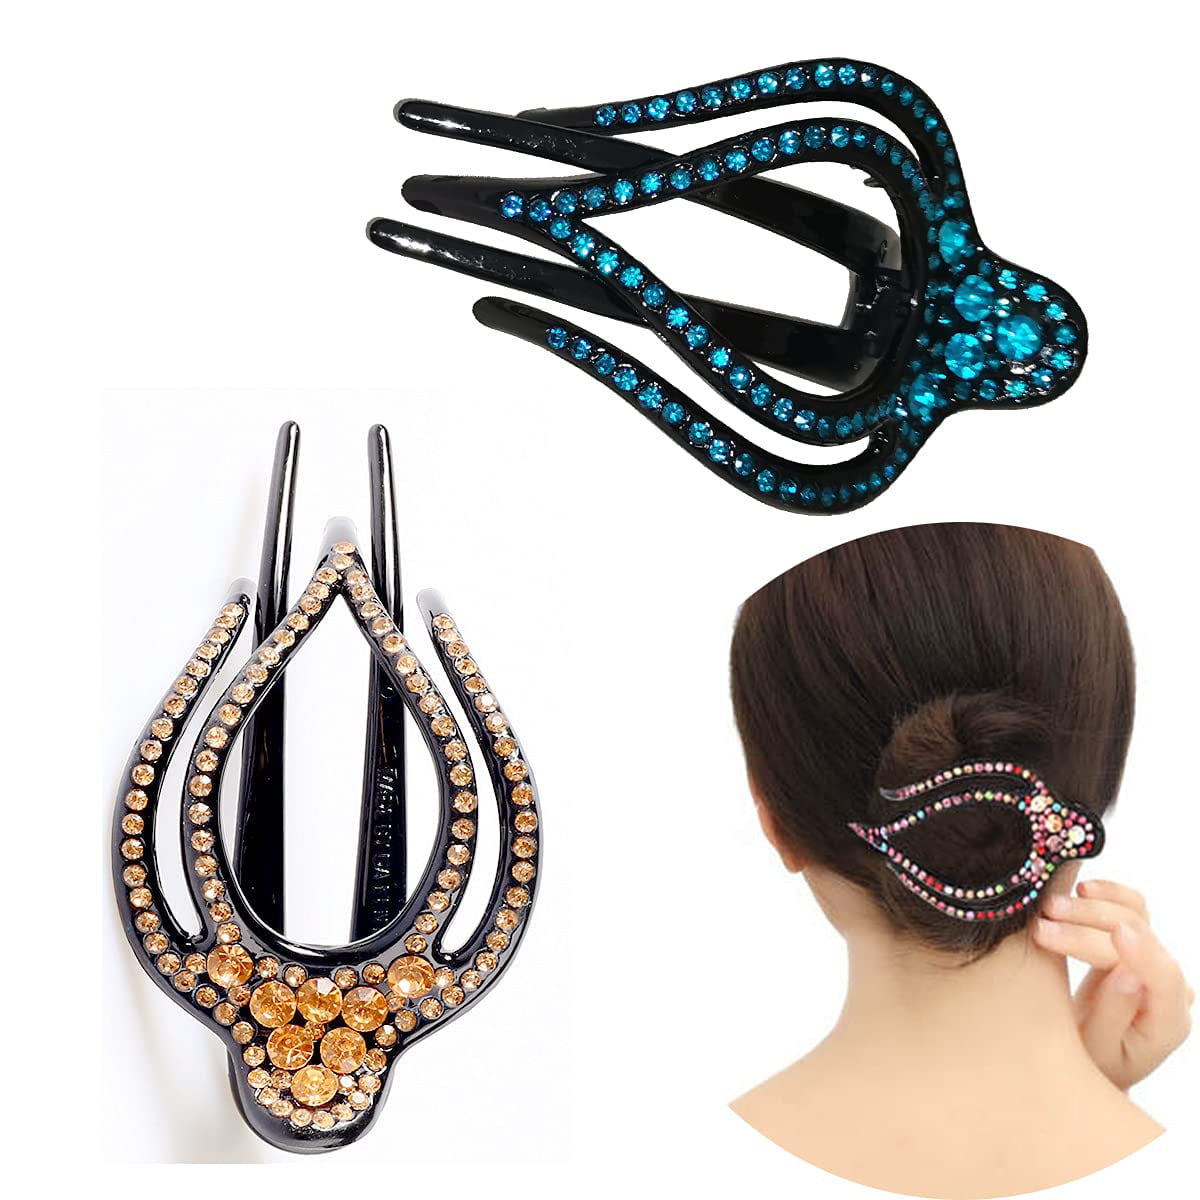 SLIDES CLIP PONYTAIL HAIR CLIPS LARGE STUNNING PATTERN NEW WOMAN BARRETTE 